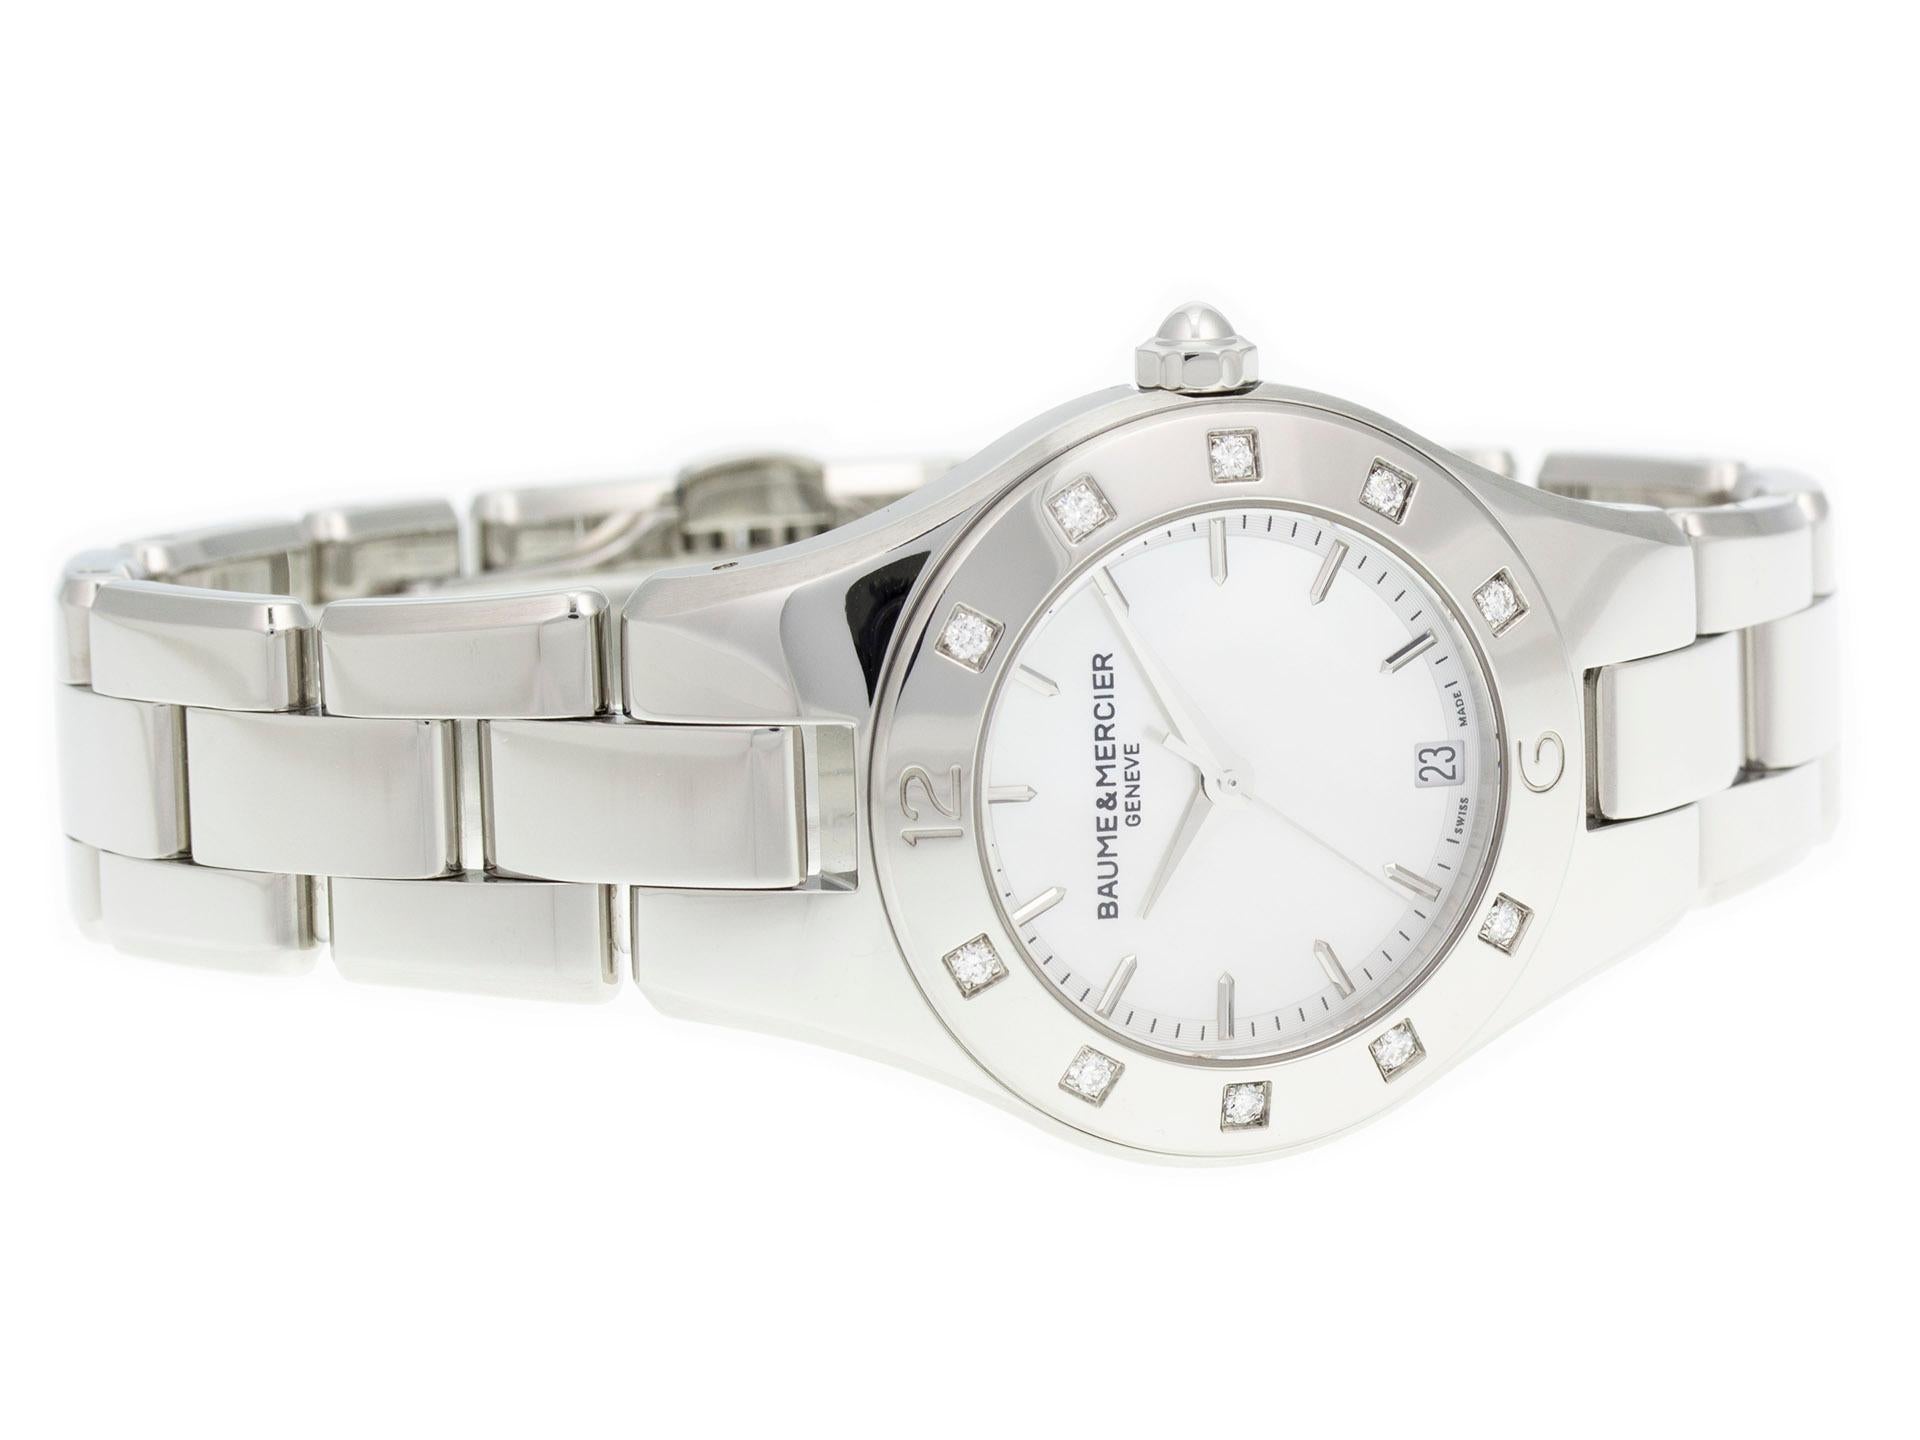 Stainless steel Baume & Mercier Linea MOA10071 watch, water resistant to 50m, with date and diamond bezel.
Watch	
Brand:	Baume & Mercier
Series:	Linea
Model #:	MOA10071
Gender:	Ladies’
Condition:	Great Display Model, Tiny Dings & Scratches on Bezel